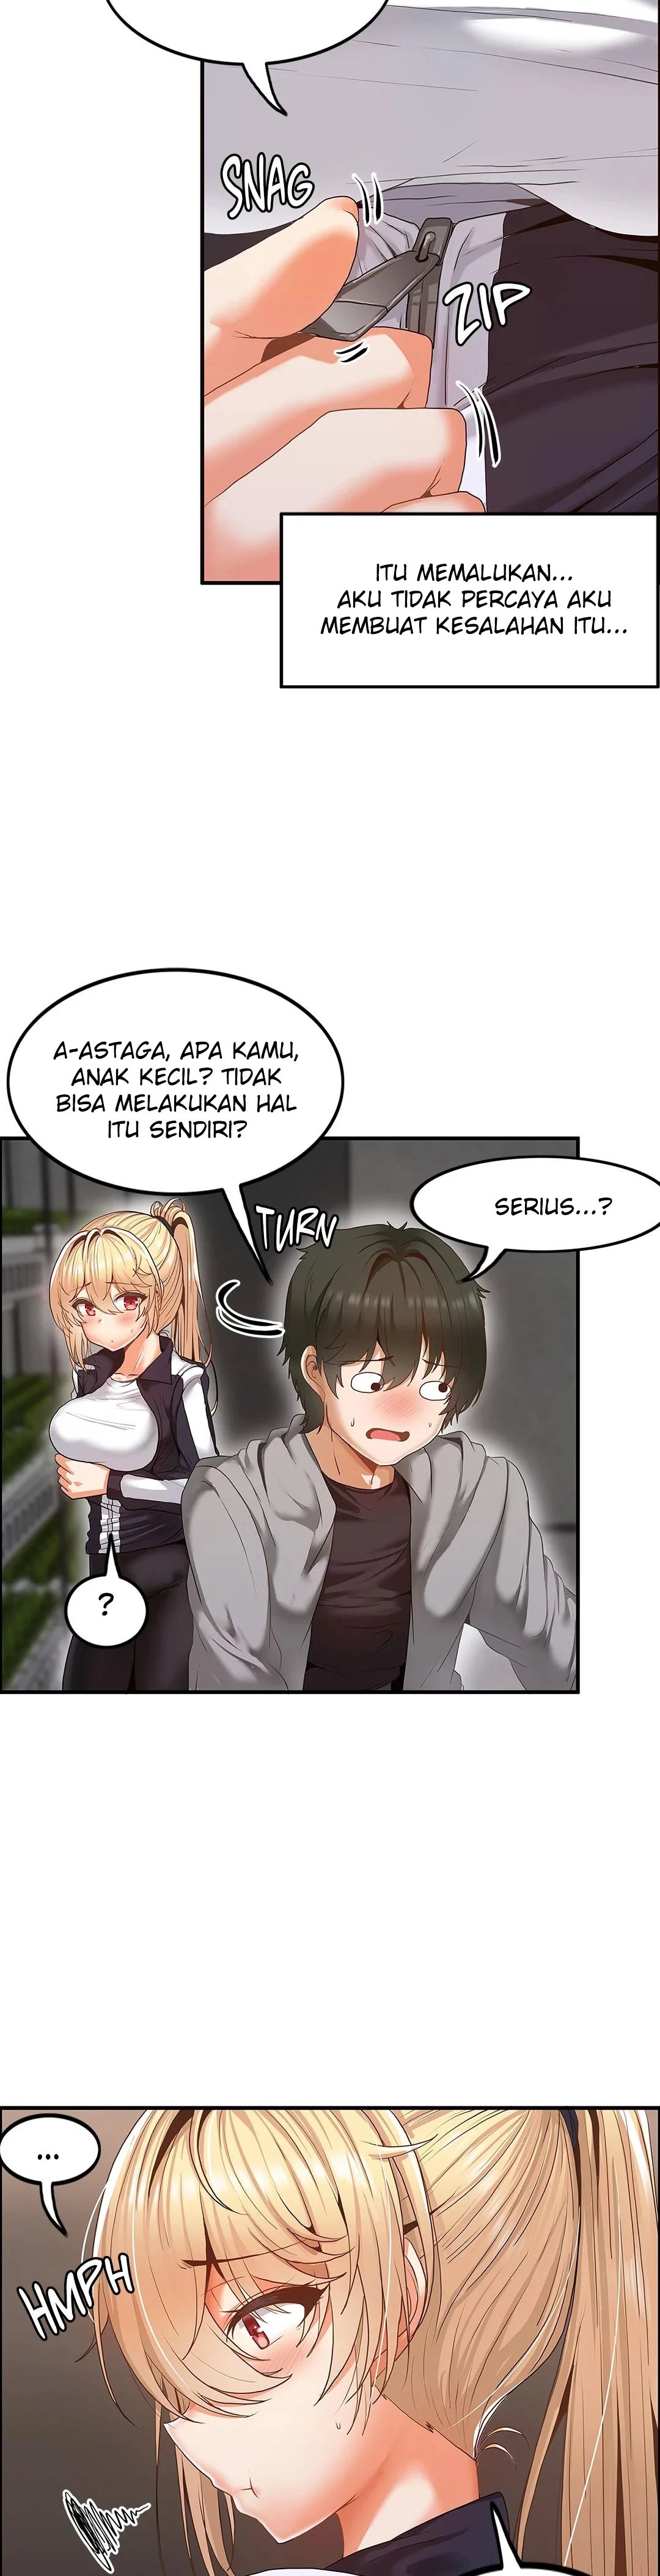 Baca The Two Eves : The Girl Trapped in the Wall Chapter 4  - GudangKomik